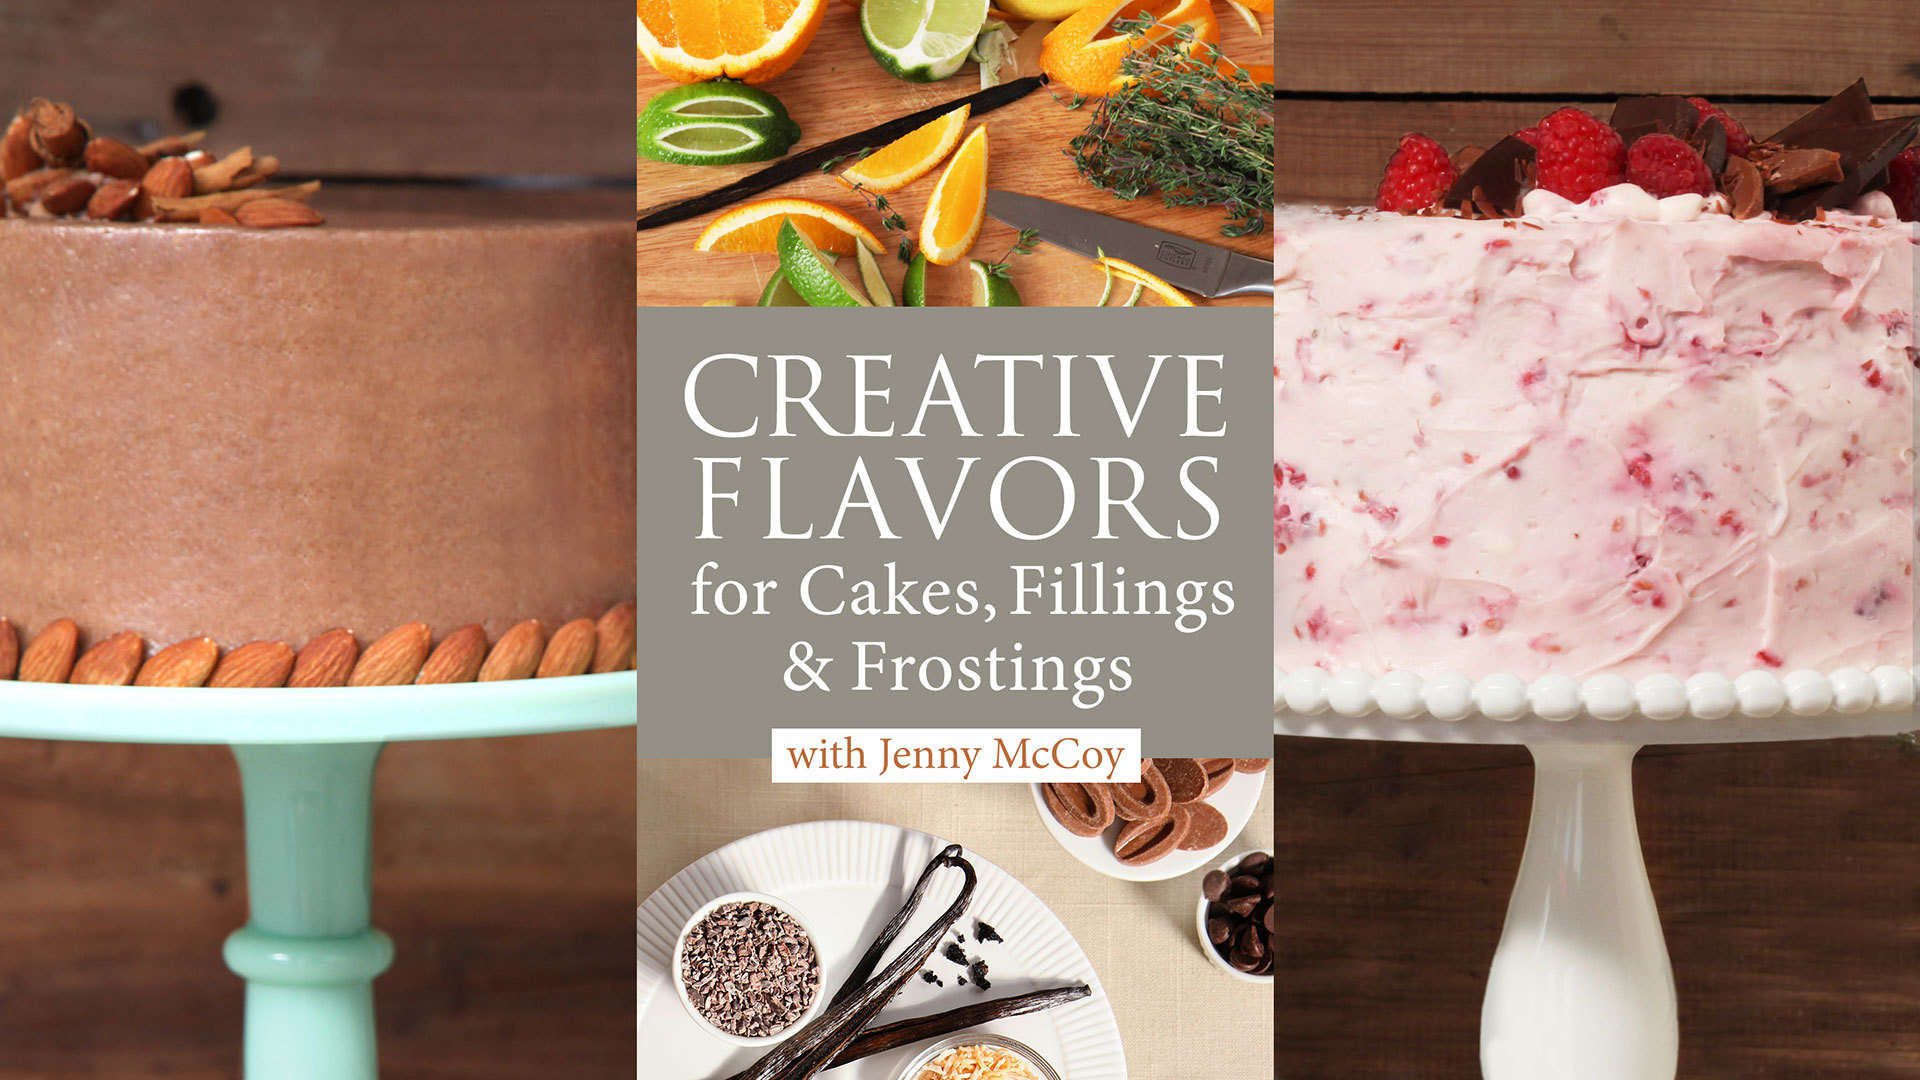 Creative Flavors for Cakes, Fillings & Frostings | Craftsy